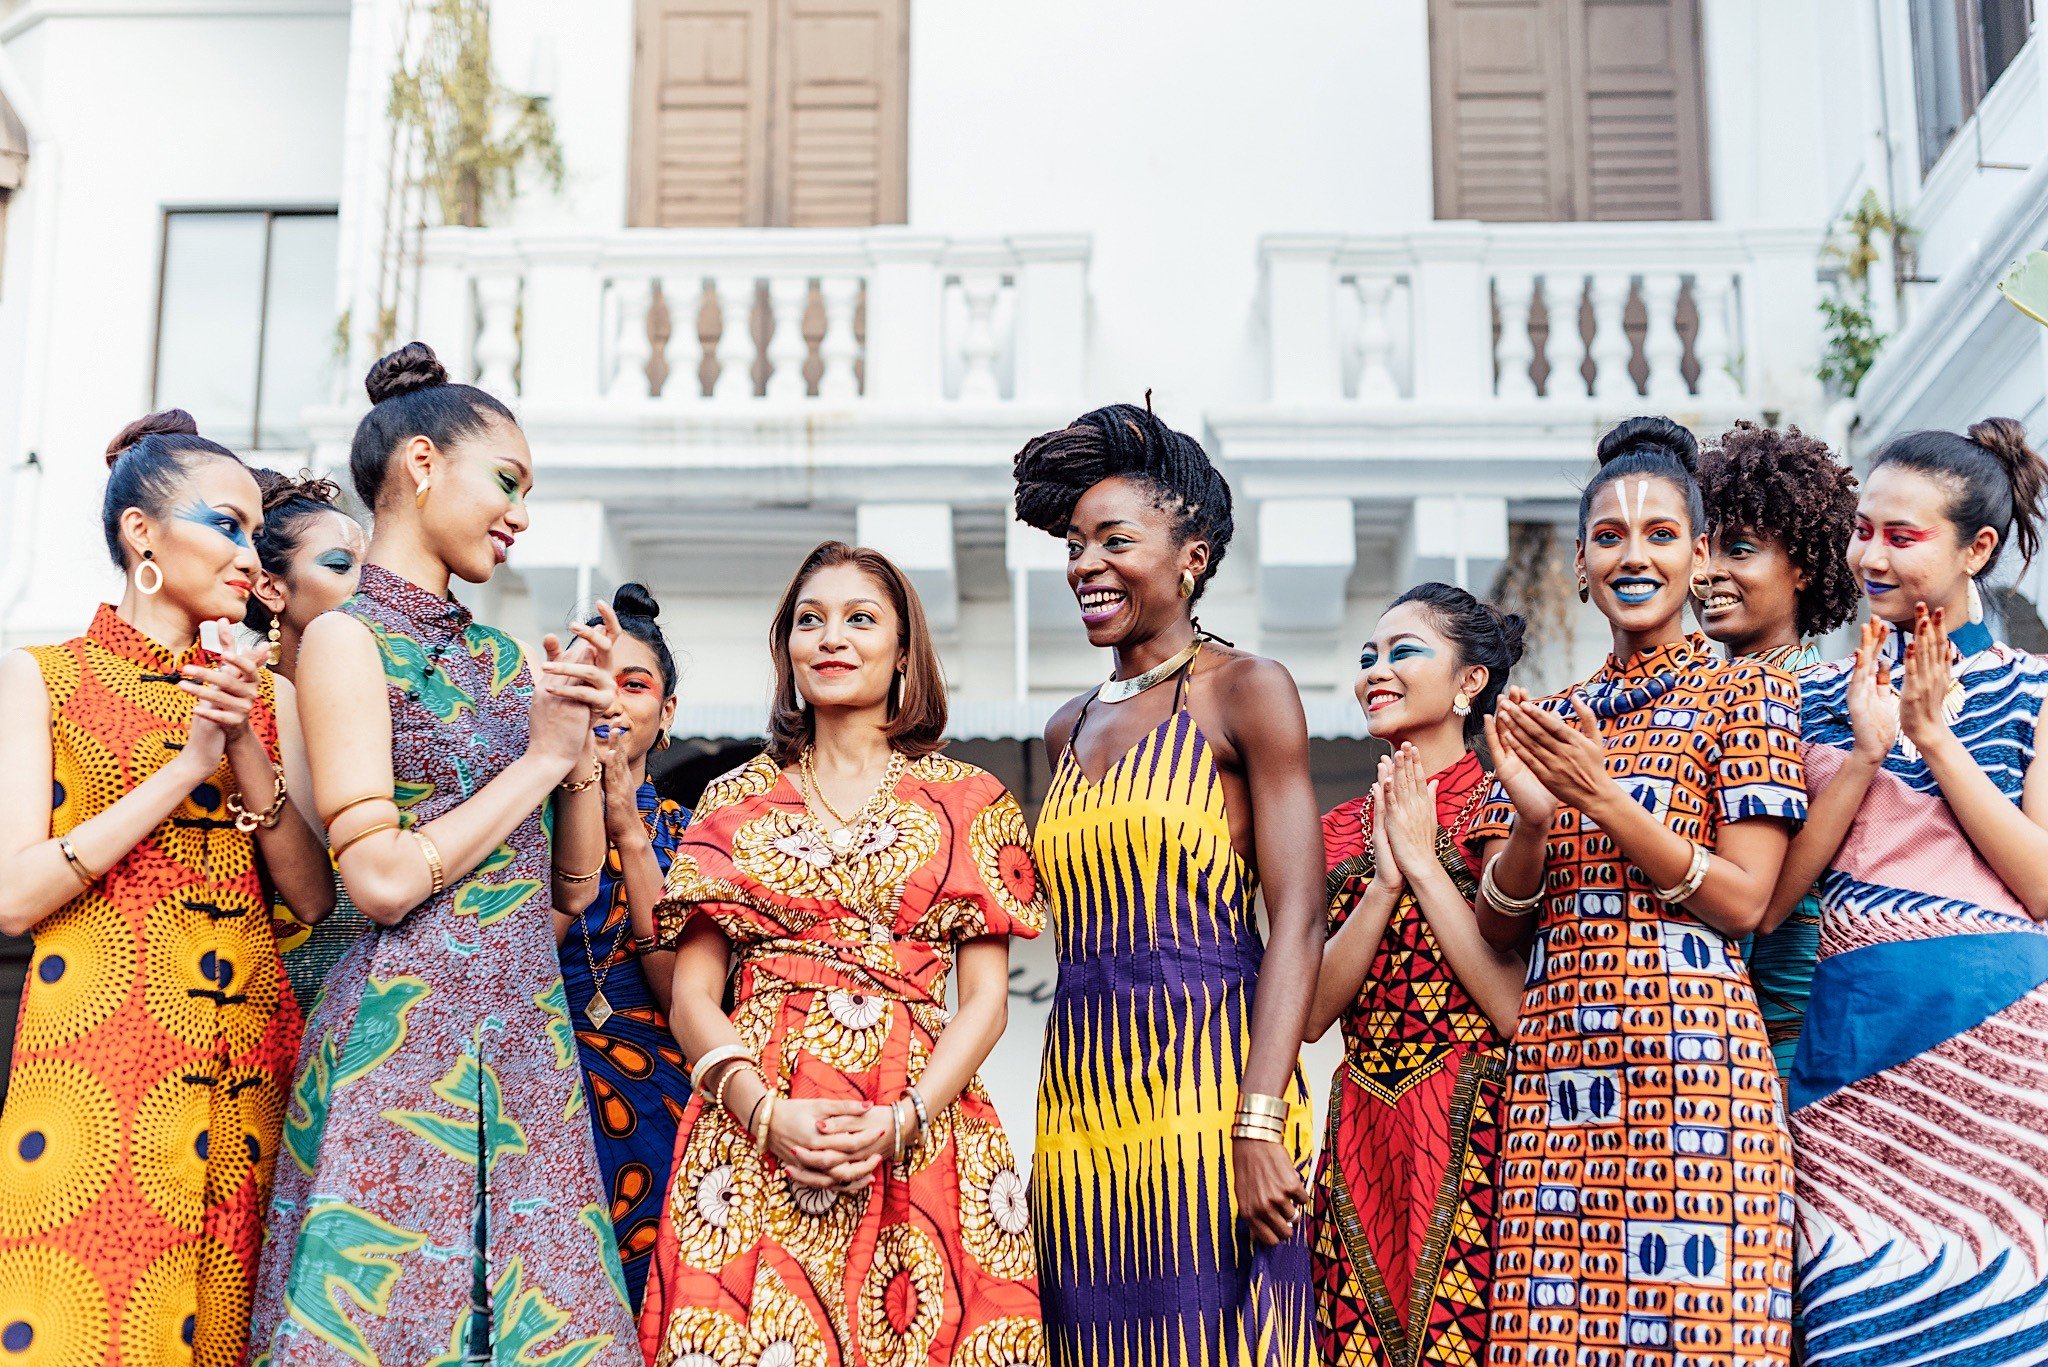 Afrika Collective is an event in Singapore that creates a platform for African fashion, food, dance and music. Photo: Afrika Collective